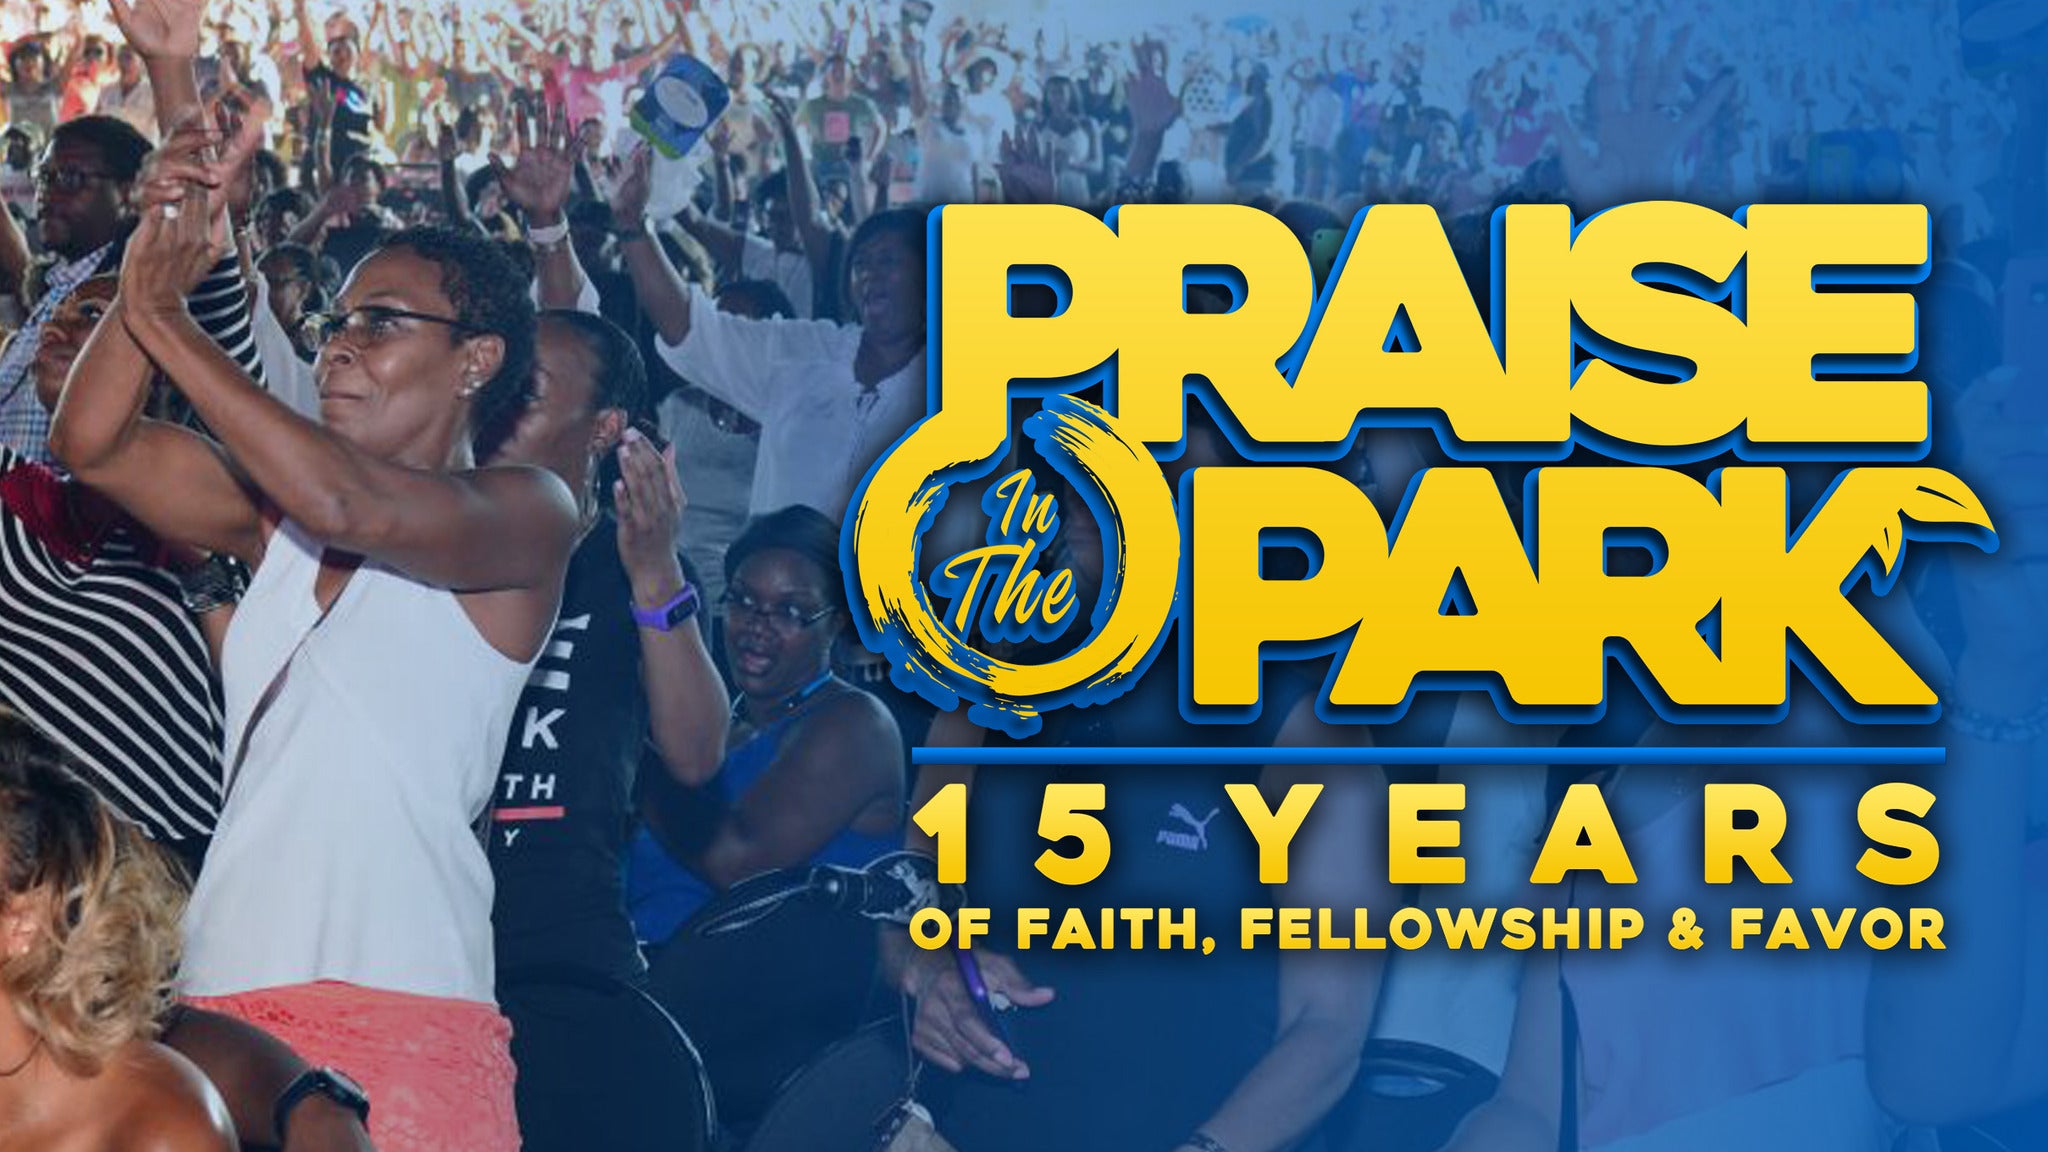 Kierra Sheardkelly And Friends Live At Praise In The Park Atlanta